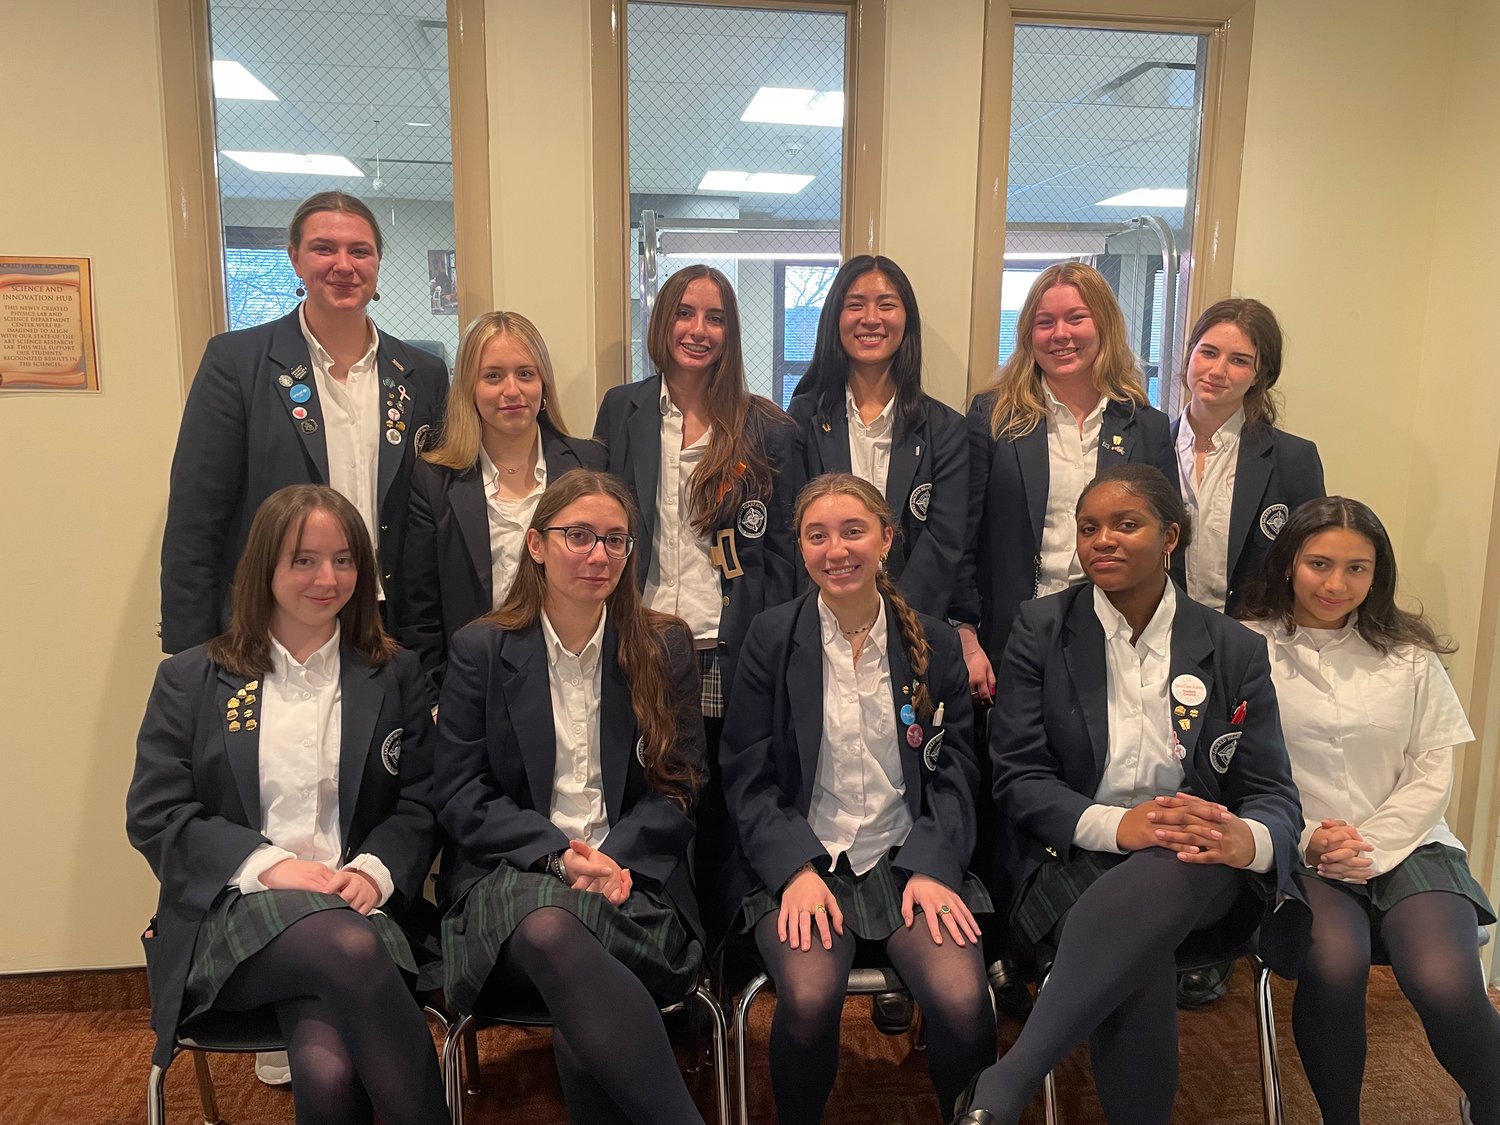 Sacred Heart scholars front row, from left Lauren McCarthy, Cara Carbone, Julia Revill, Gabrielle Augustin, Catalina Ramirez; In the back from left: Madeleine Graham, Katherine Lynch, Ava Guglielmo, Isabel Louie, Olivia Shuff and Kayla Romano.